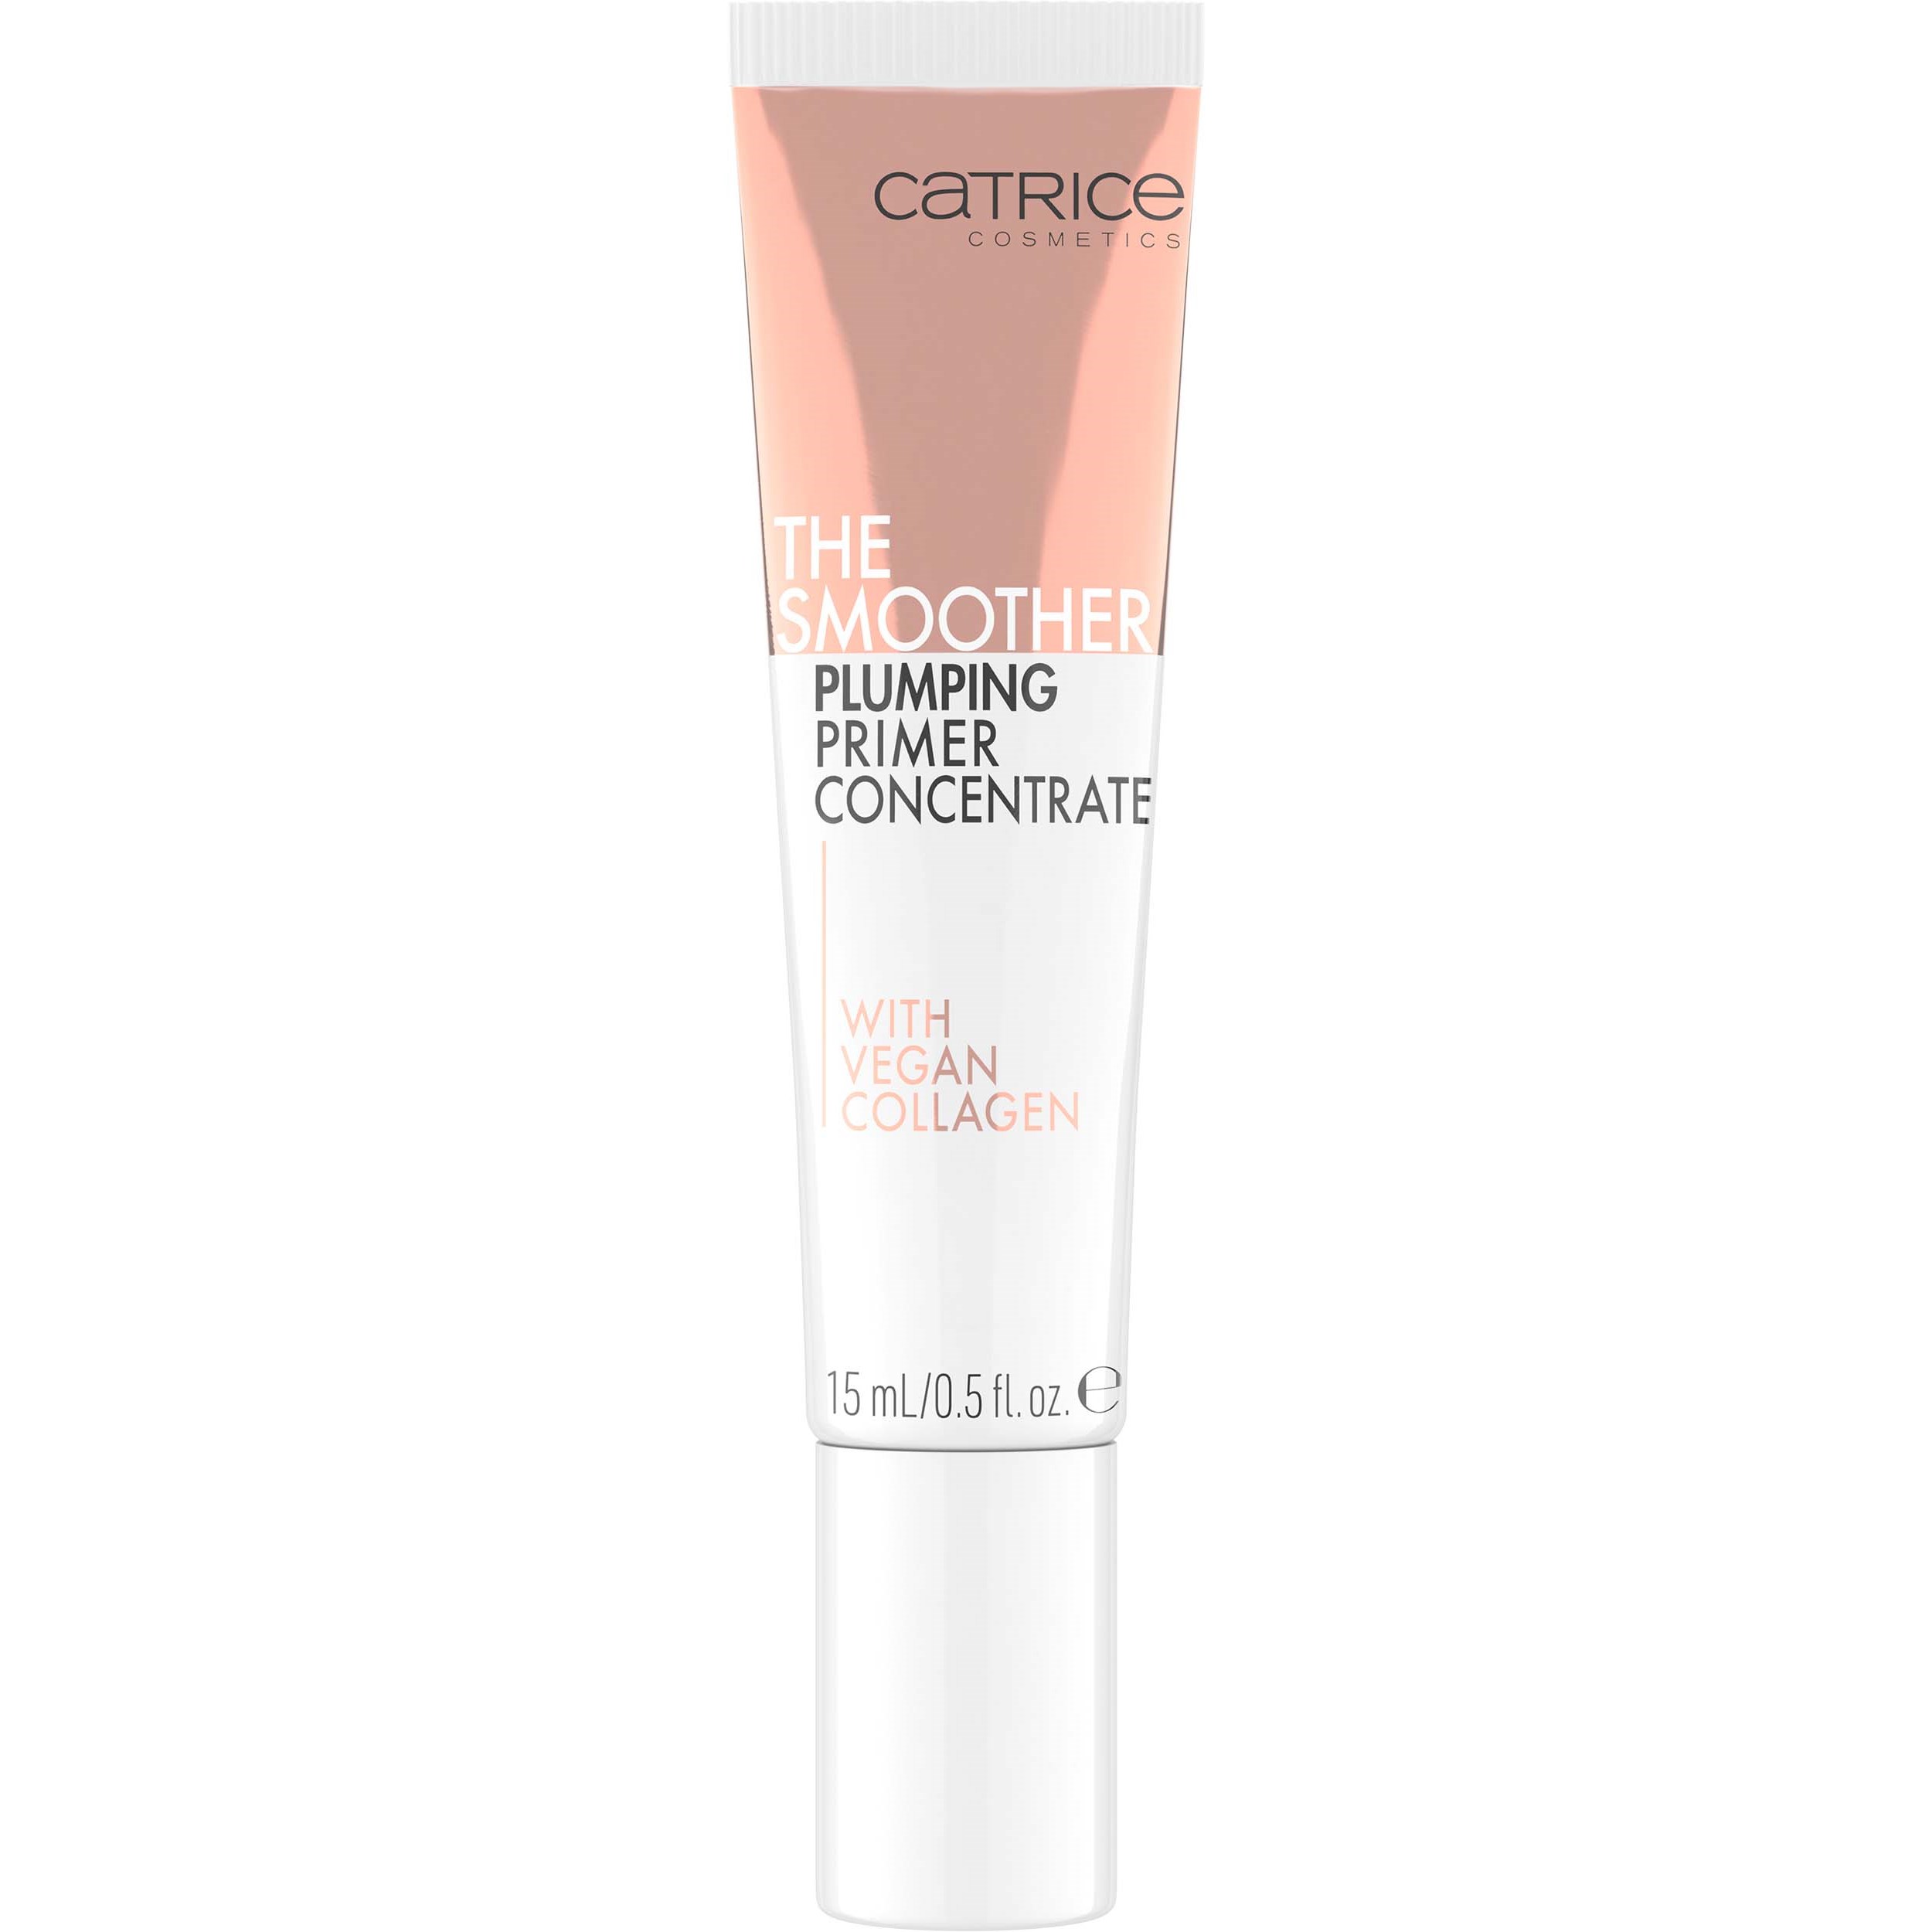 Bilde av Catrice The Smoother Plumping Primer Concentrate